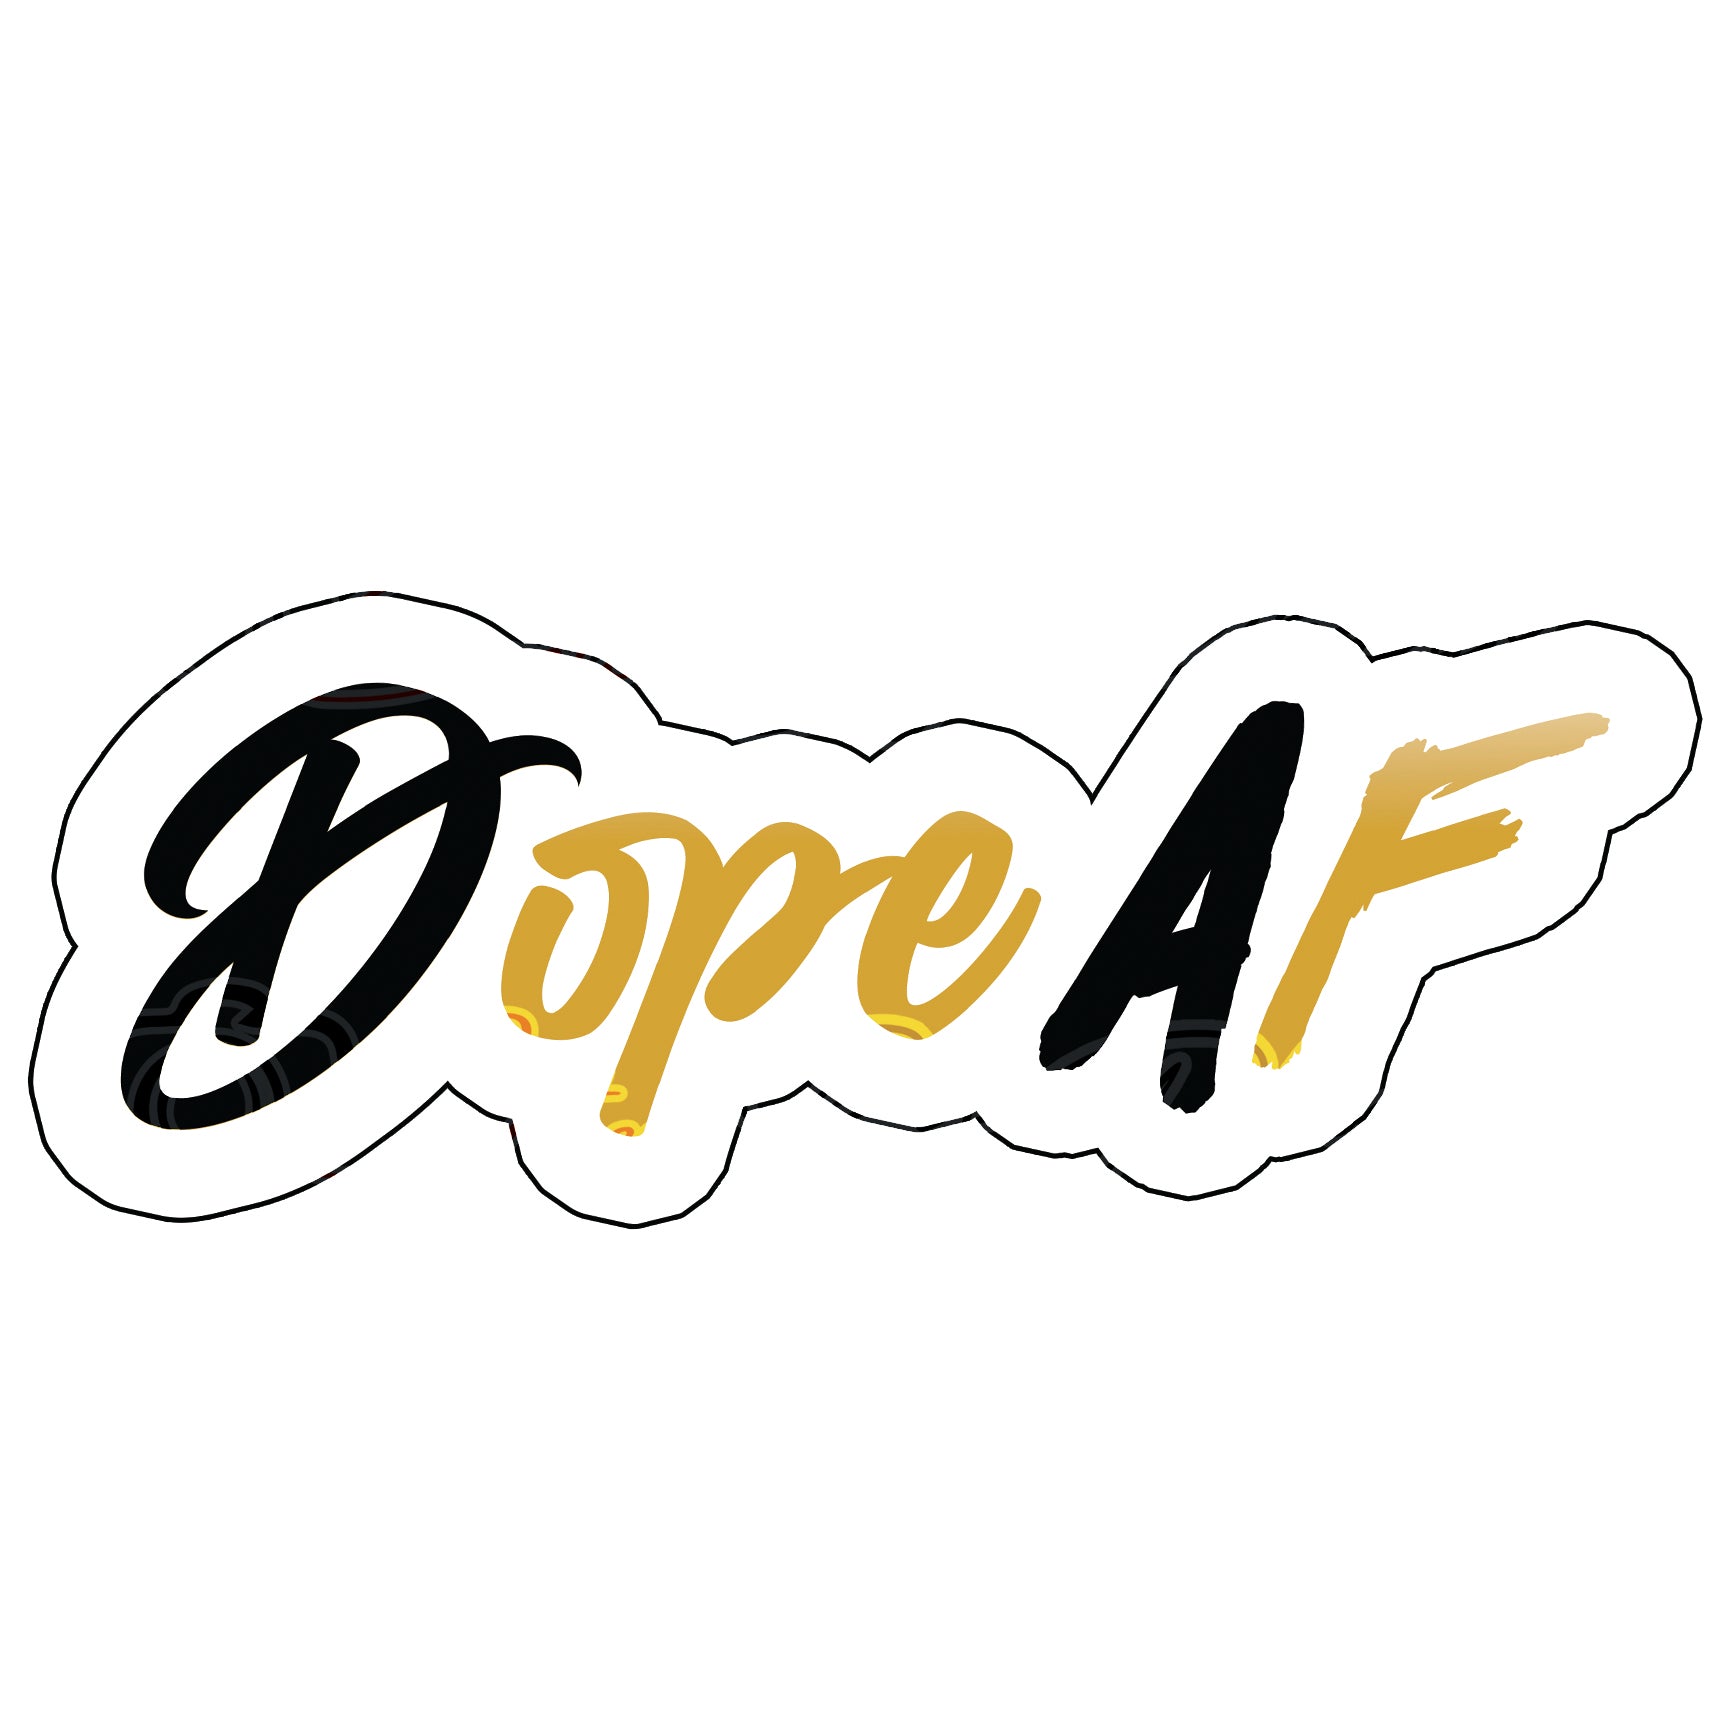  Dope Af  prop- photo booth props- props-photo booth props-custom props- custom prop signs-props -Curated by Phoenix 